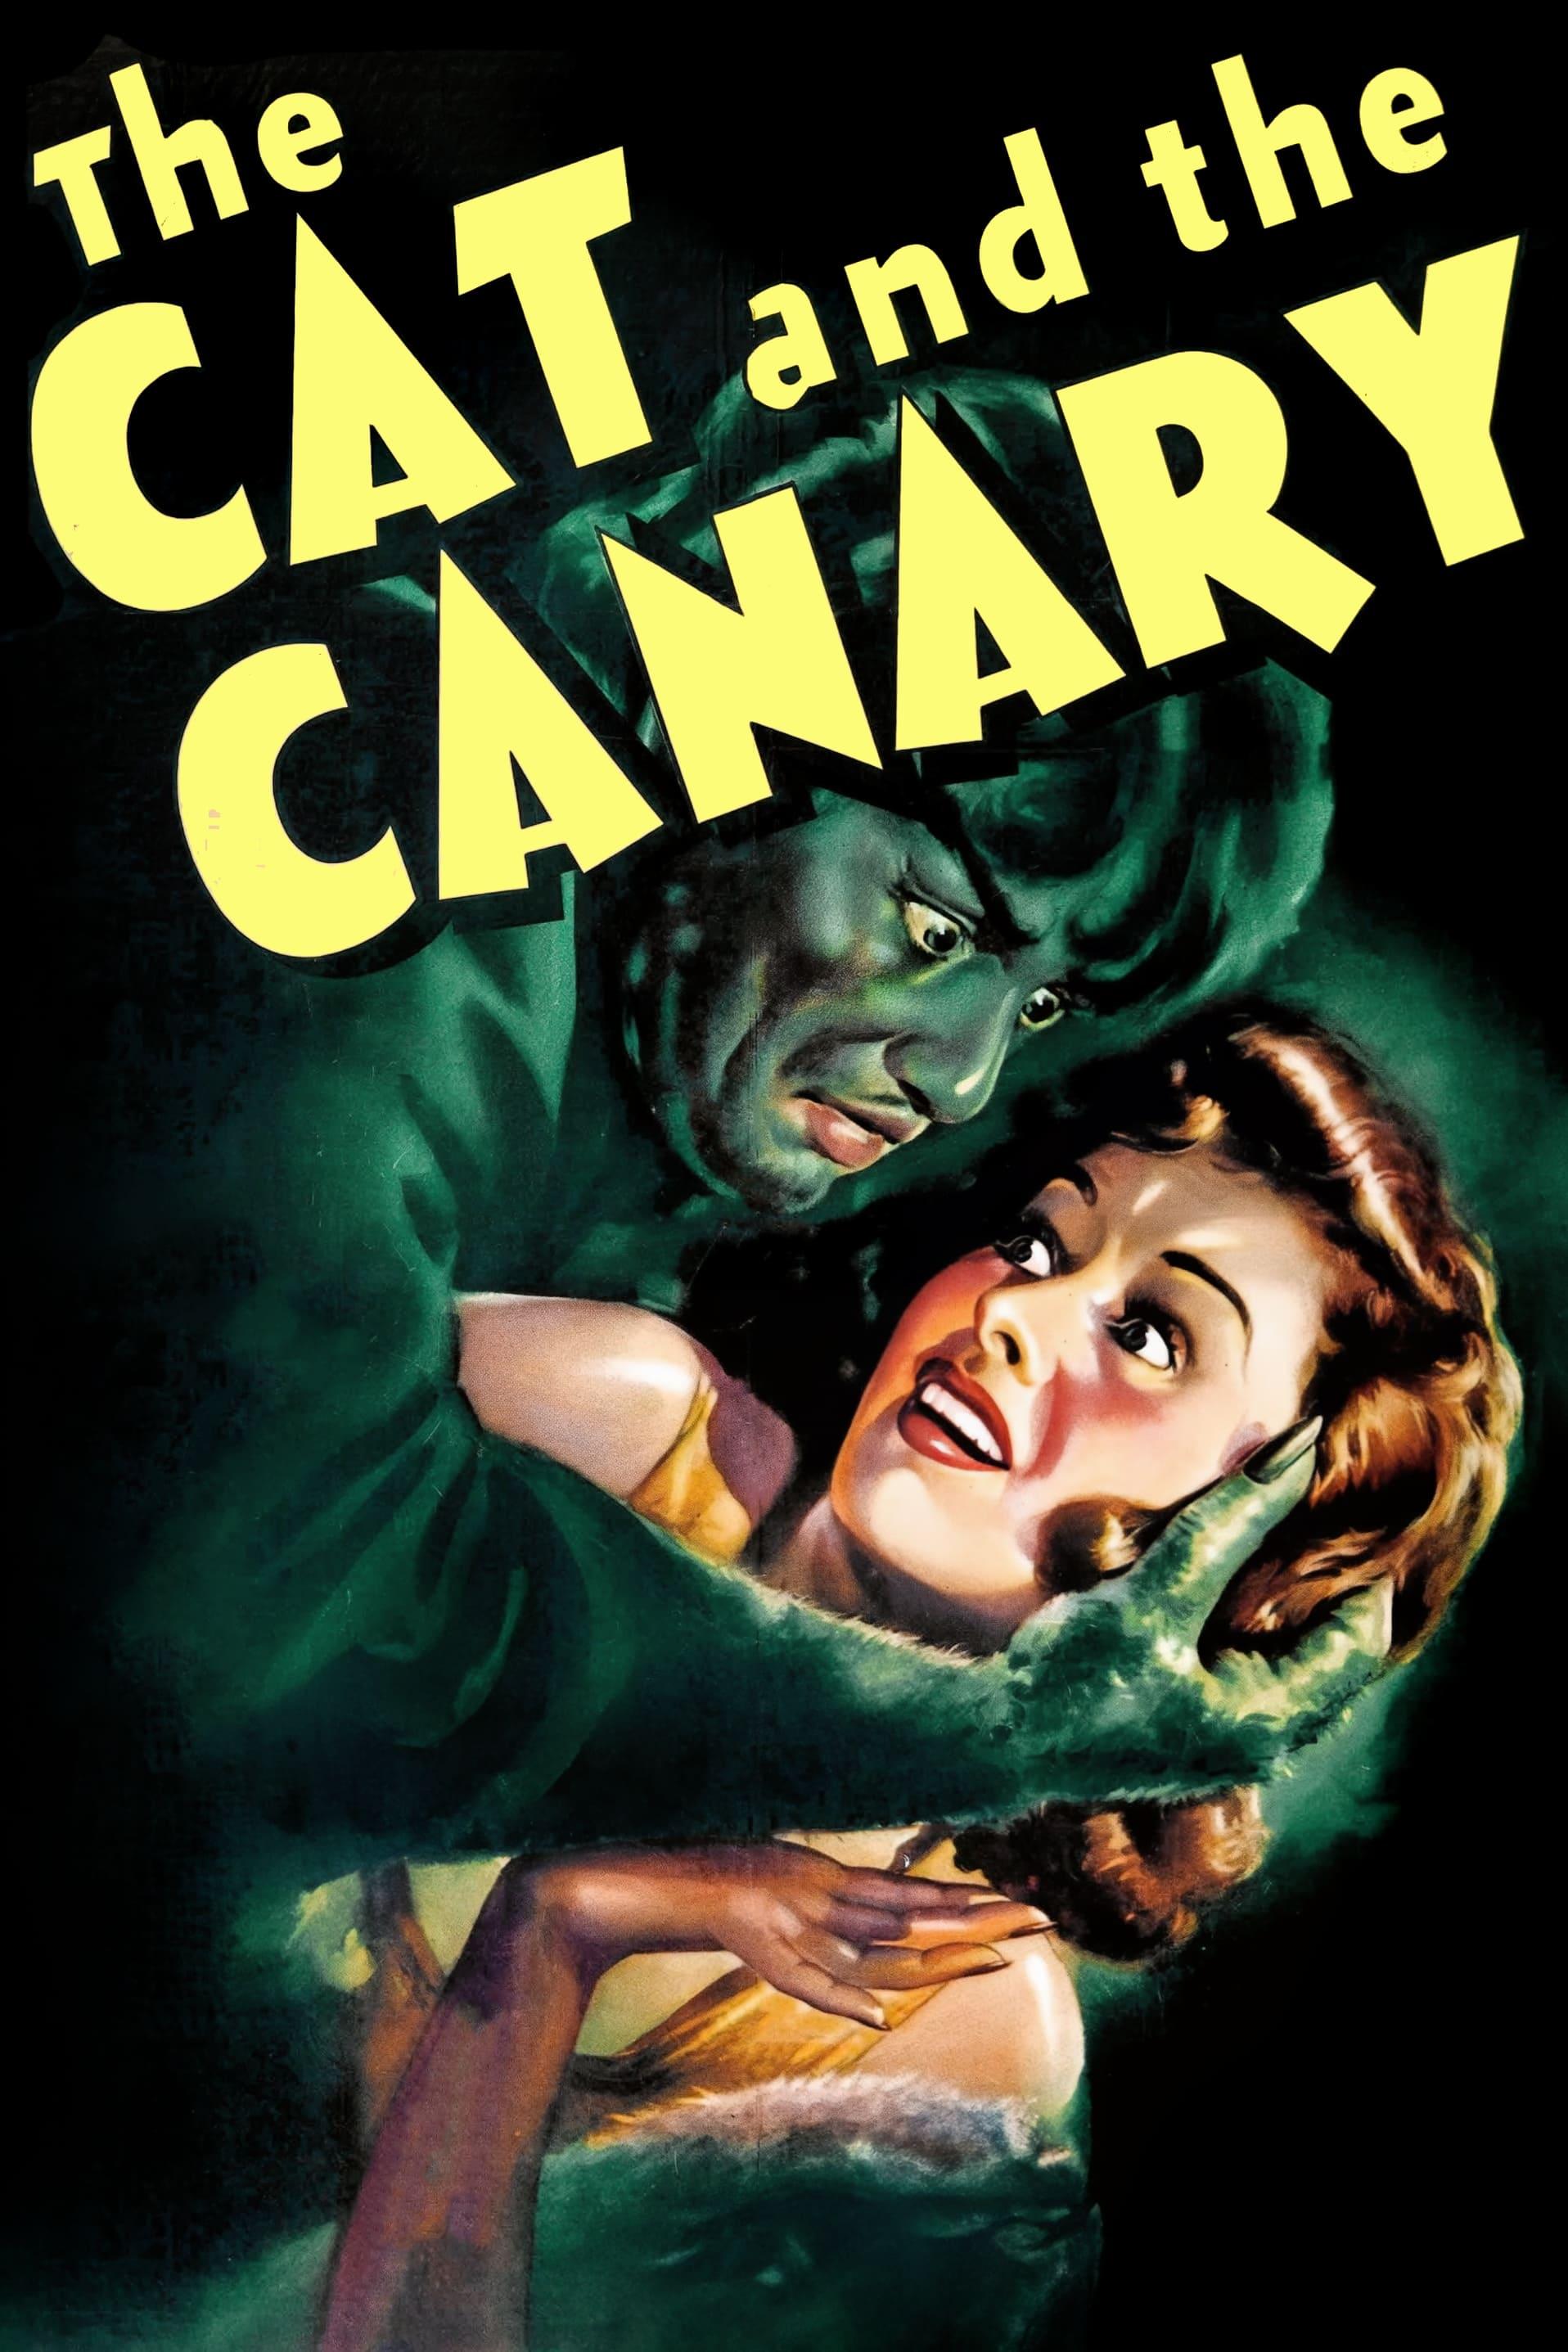 The Cat and the Canary poster